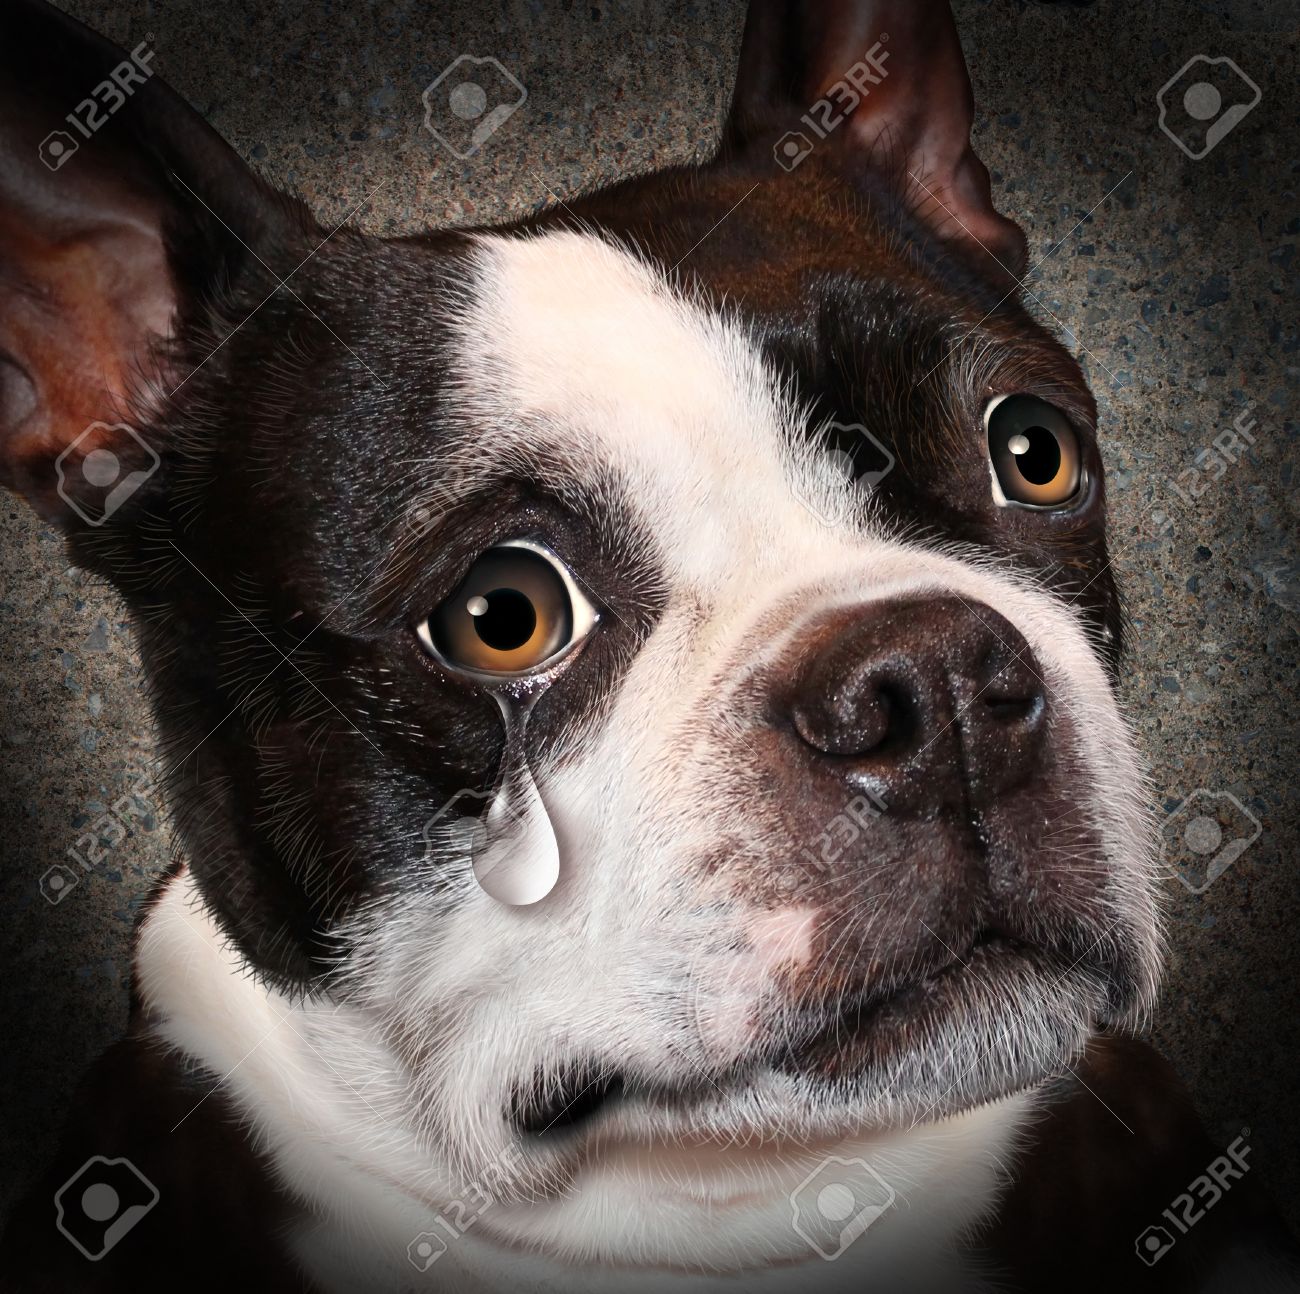 26171436-lost-pet-animal-cruelty-and-neglect-concept-with-a-sad-crying-dog-looking-at-the-viewer-with-a-tear-.jpg